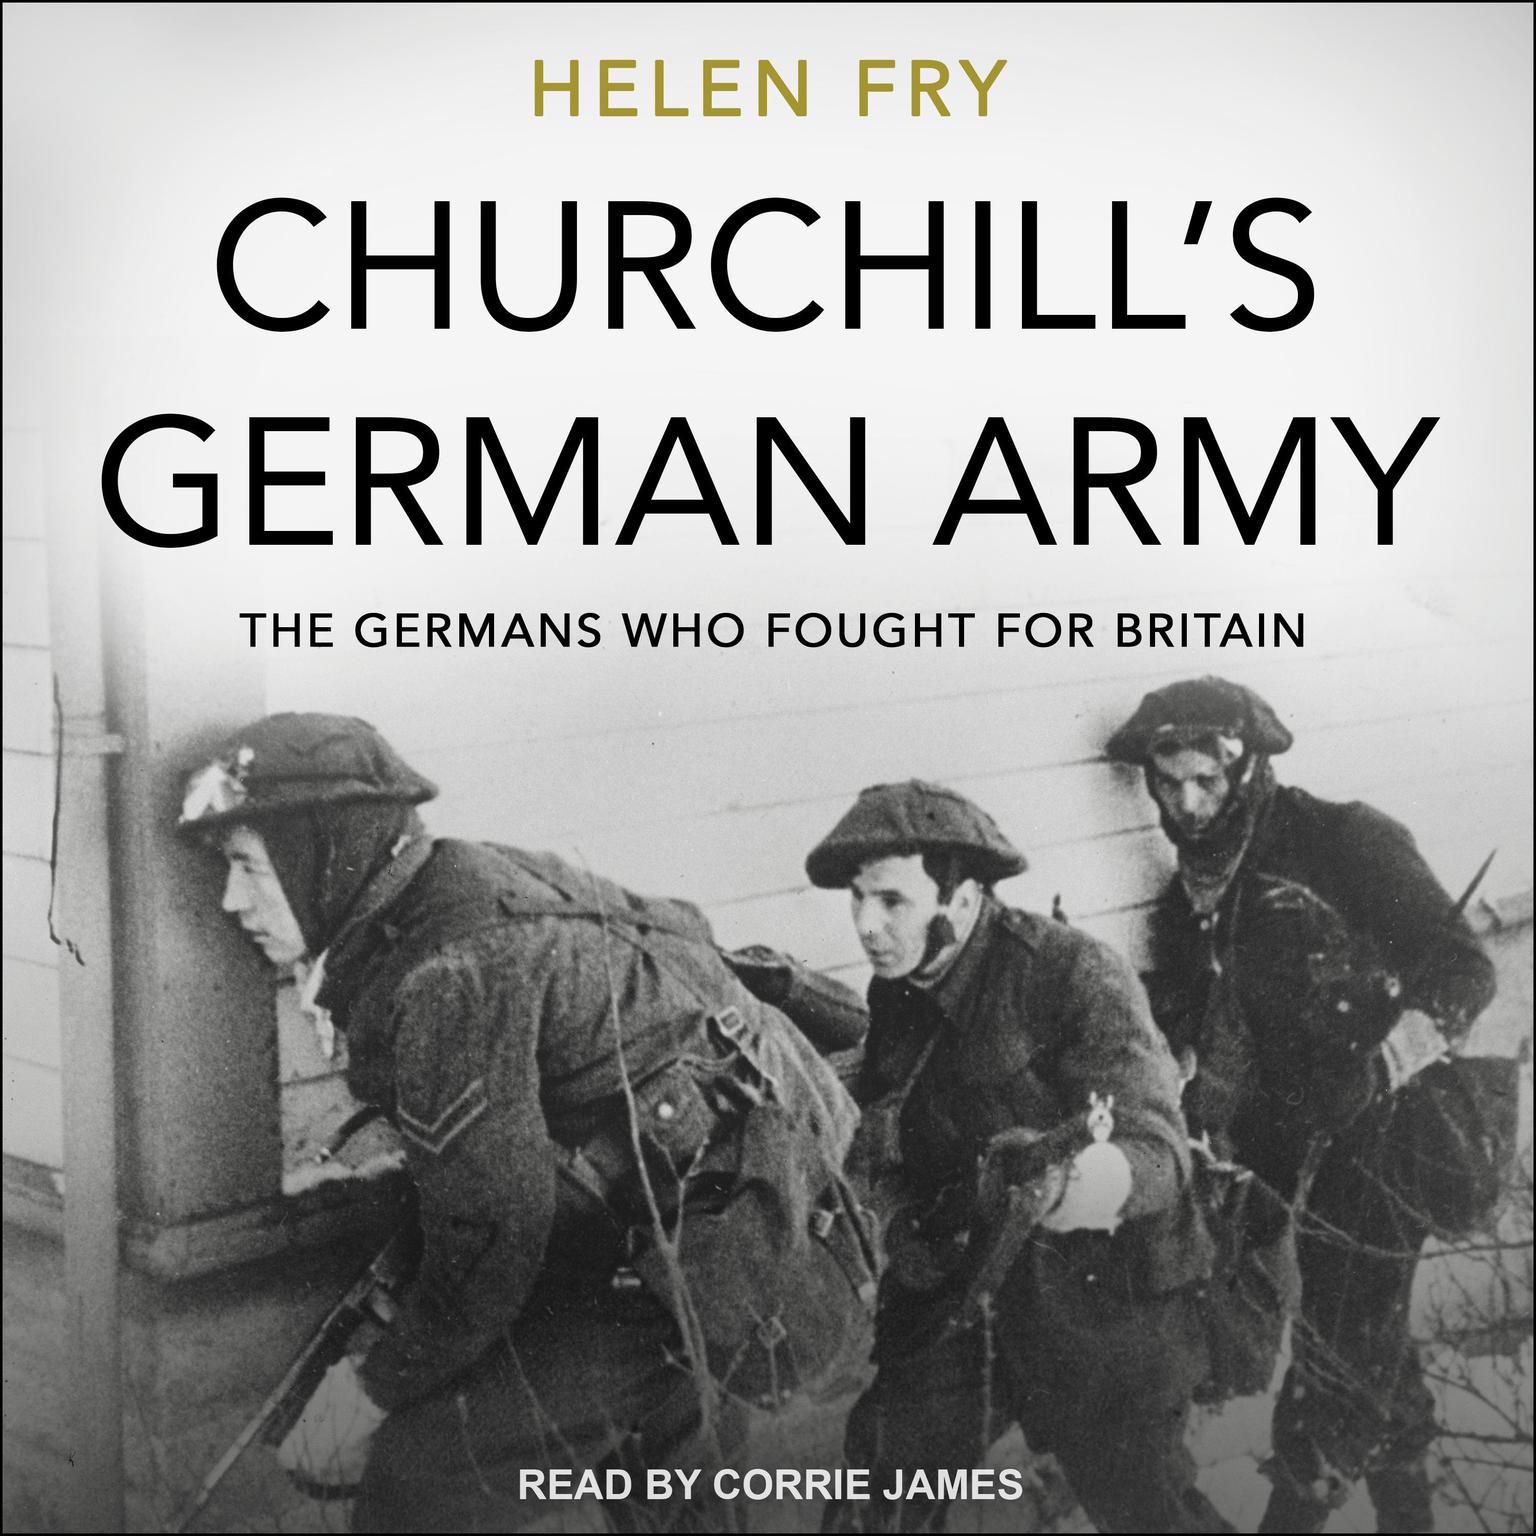 Churchills German Army: The Germans who fought for Britain Audiobook, by Helen Fry